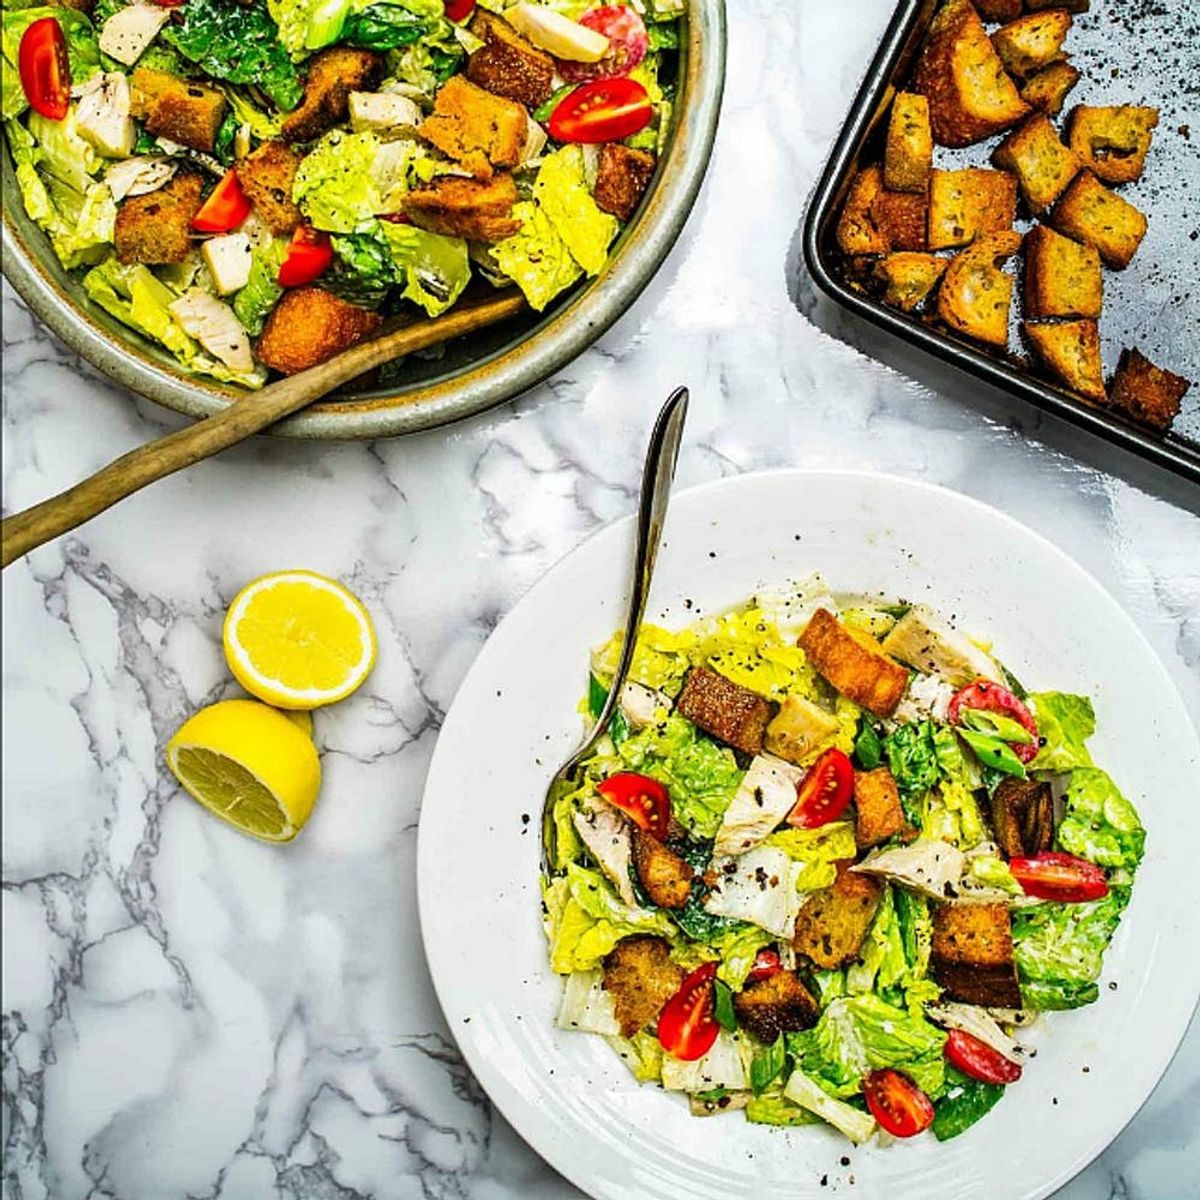 13 Bountiful Vegan Salads to Devour for This Summer’s Meatless Monday